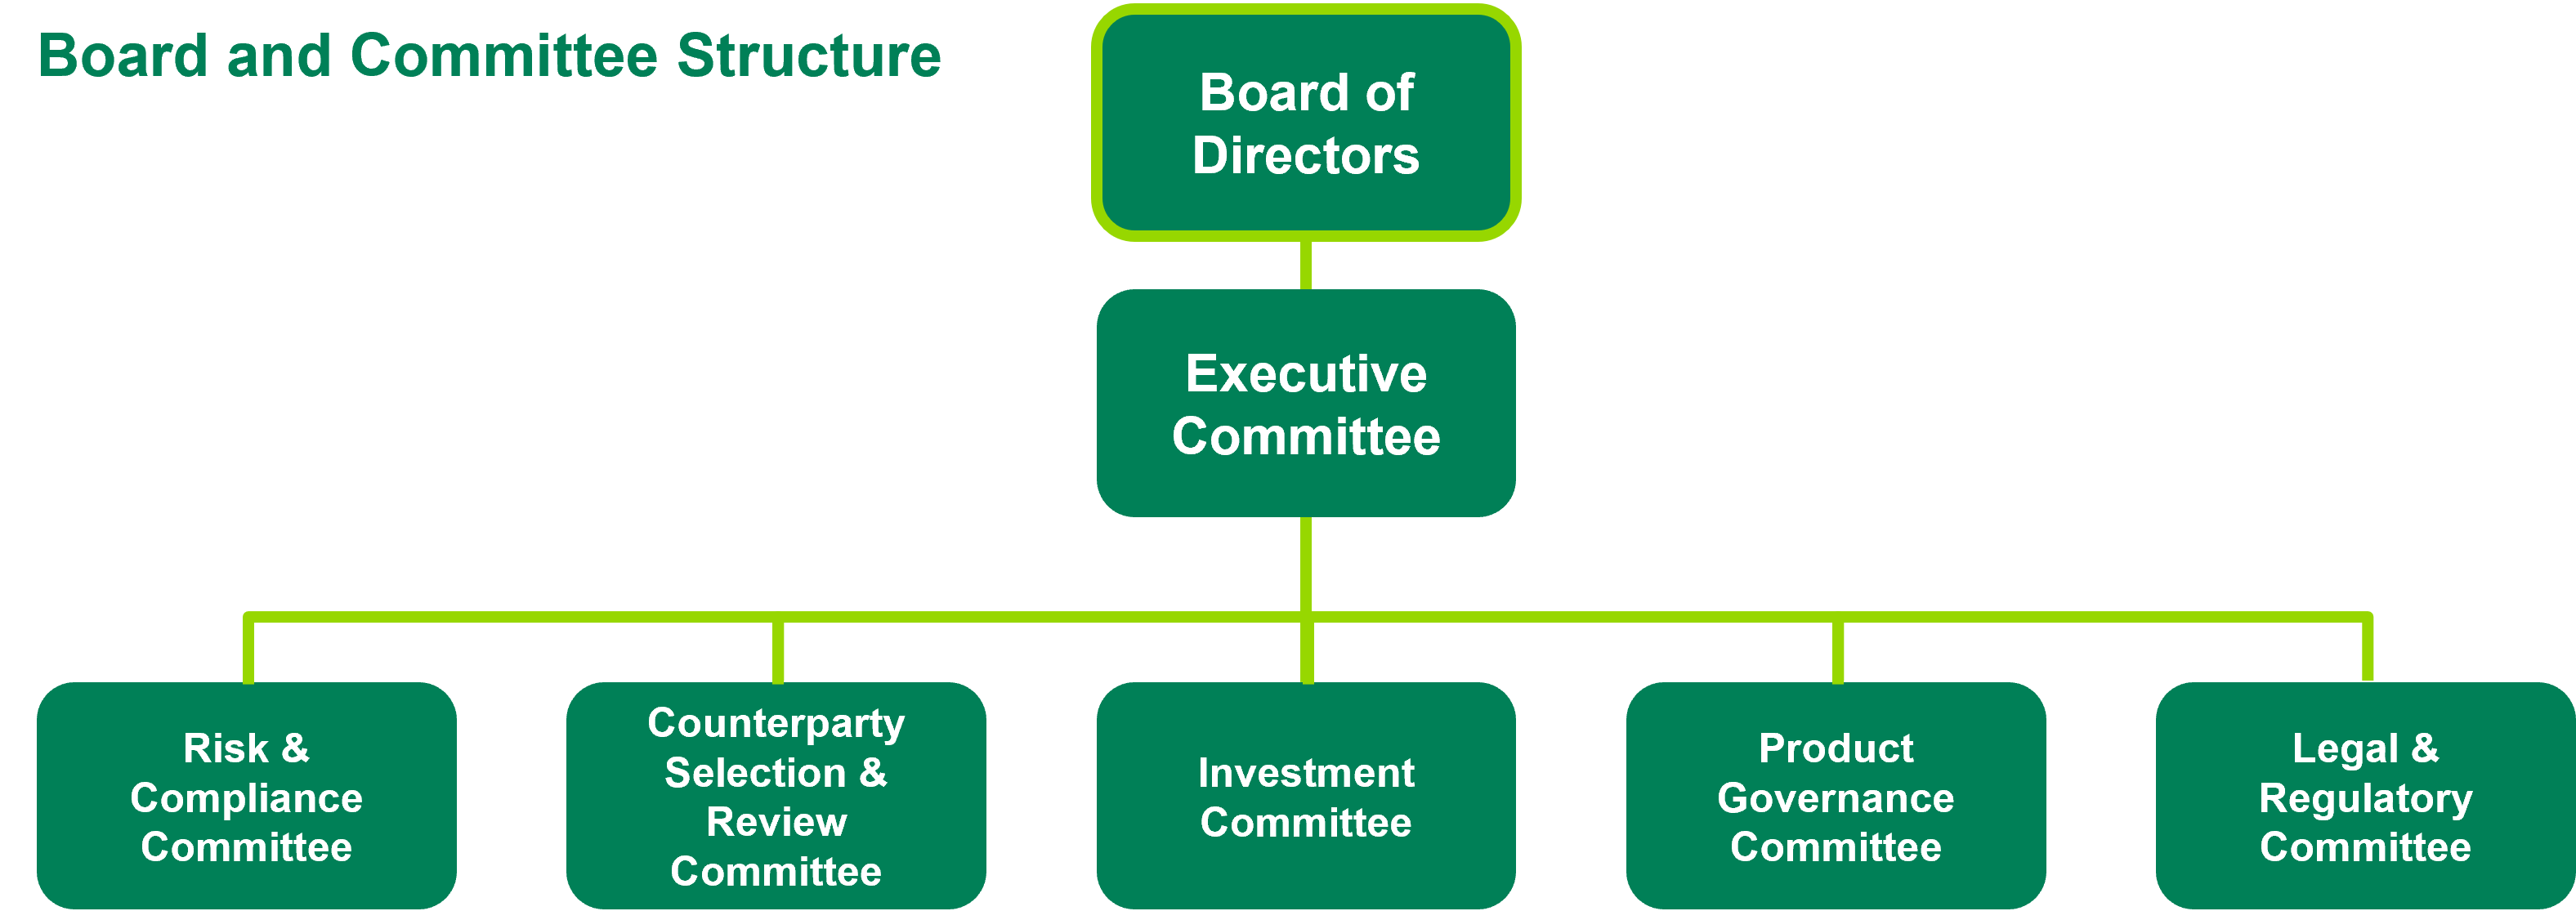 Board and Committee